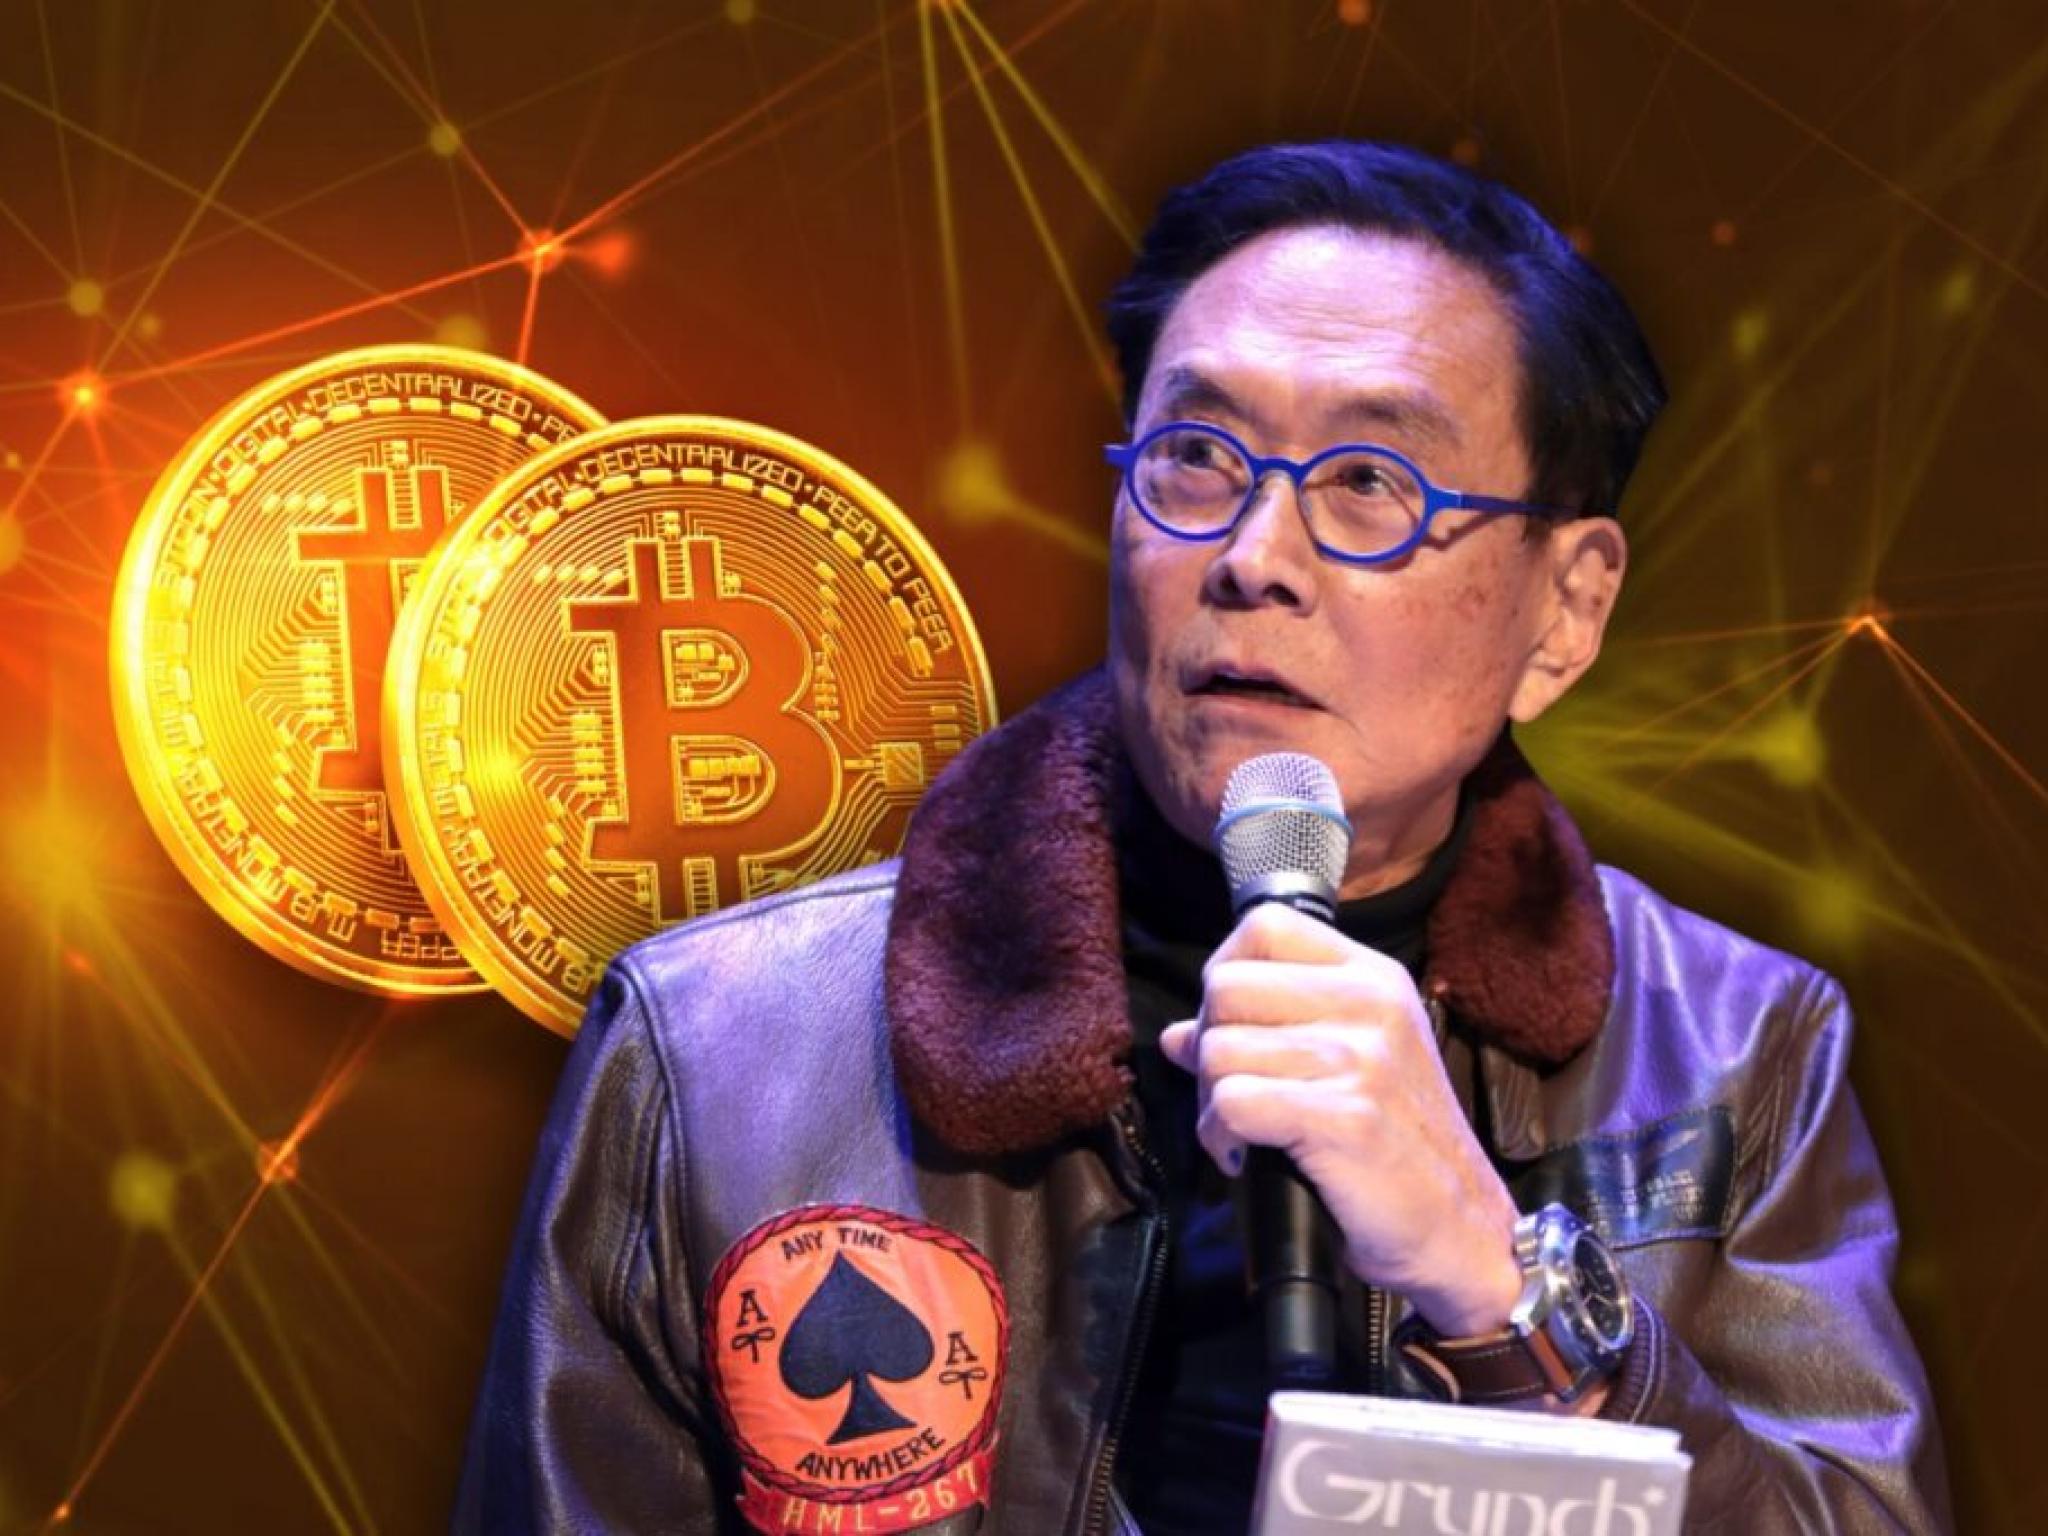  rich-dad-poor-dad-author-robert-kiyosaki-comes-up-with-another-bold-projection-bitcoin-will-be-350000-by-august-25 